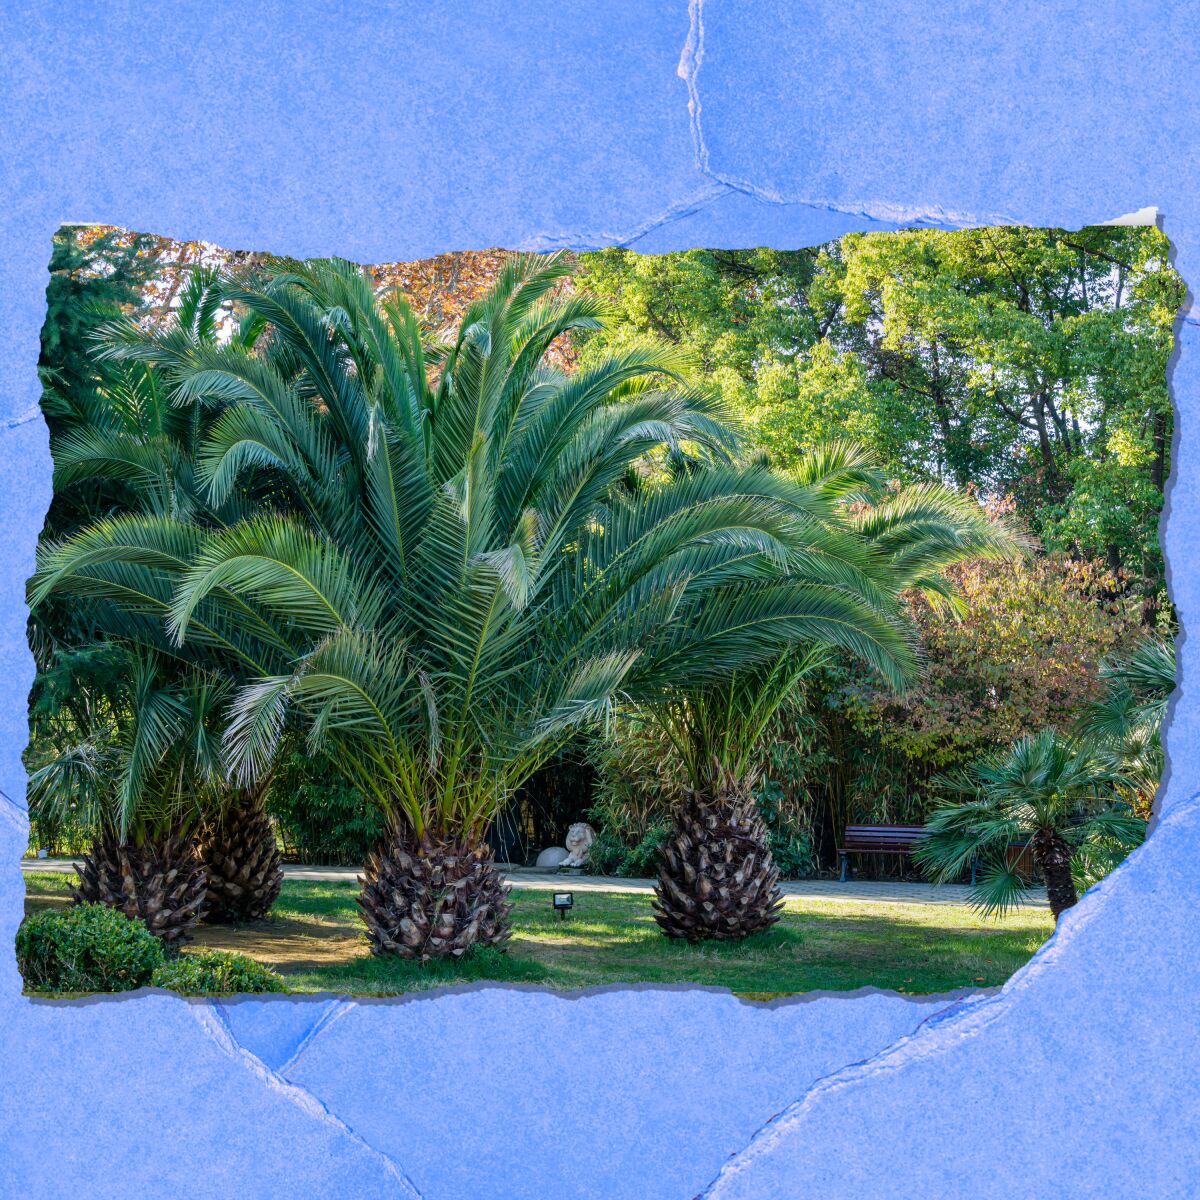 Three short palm trees with heavy trunks.